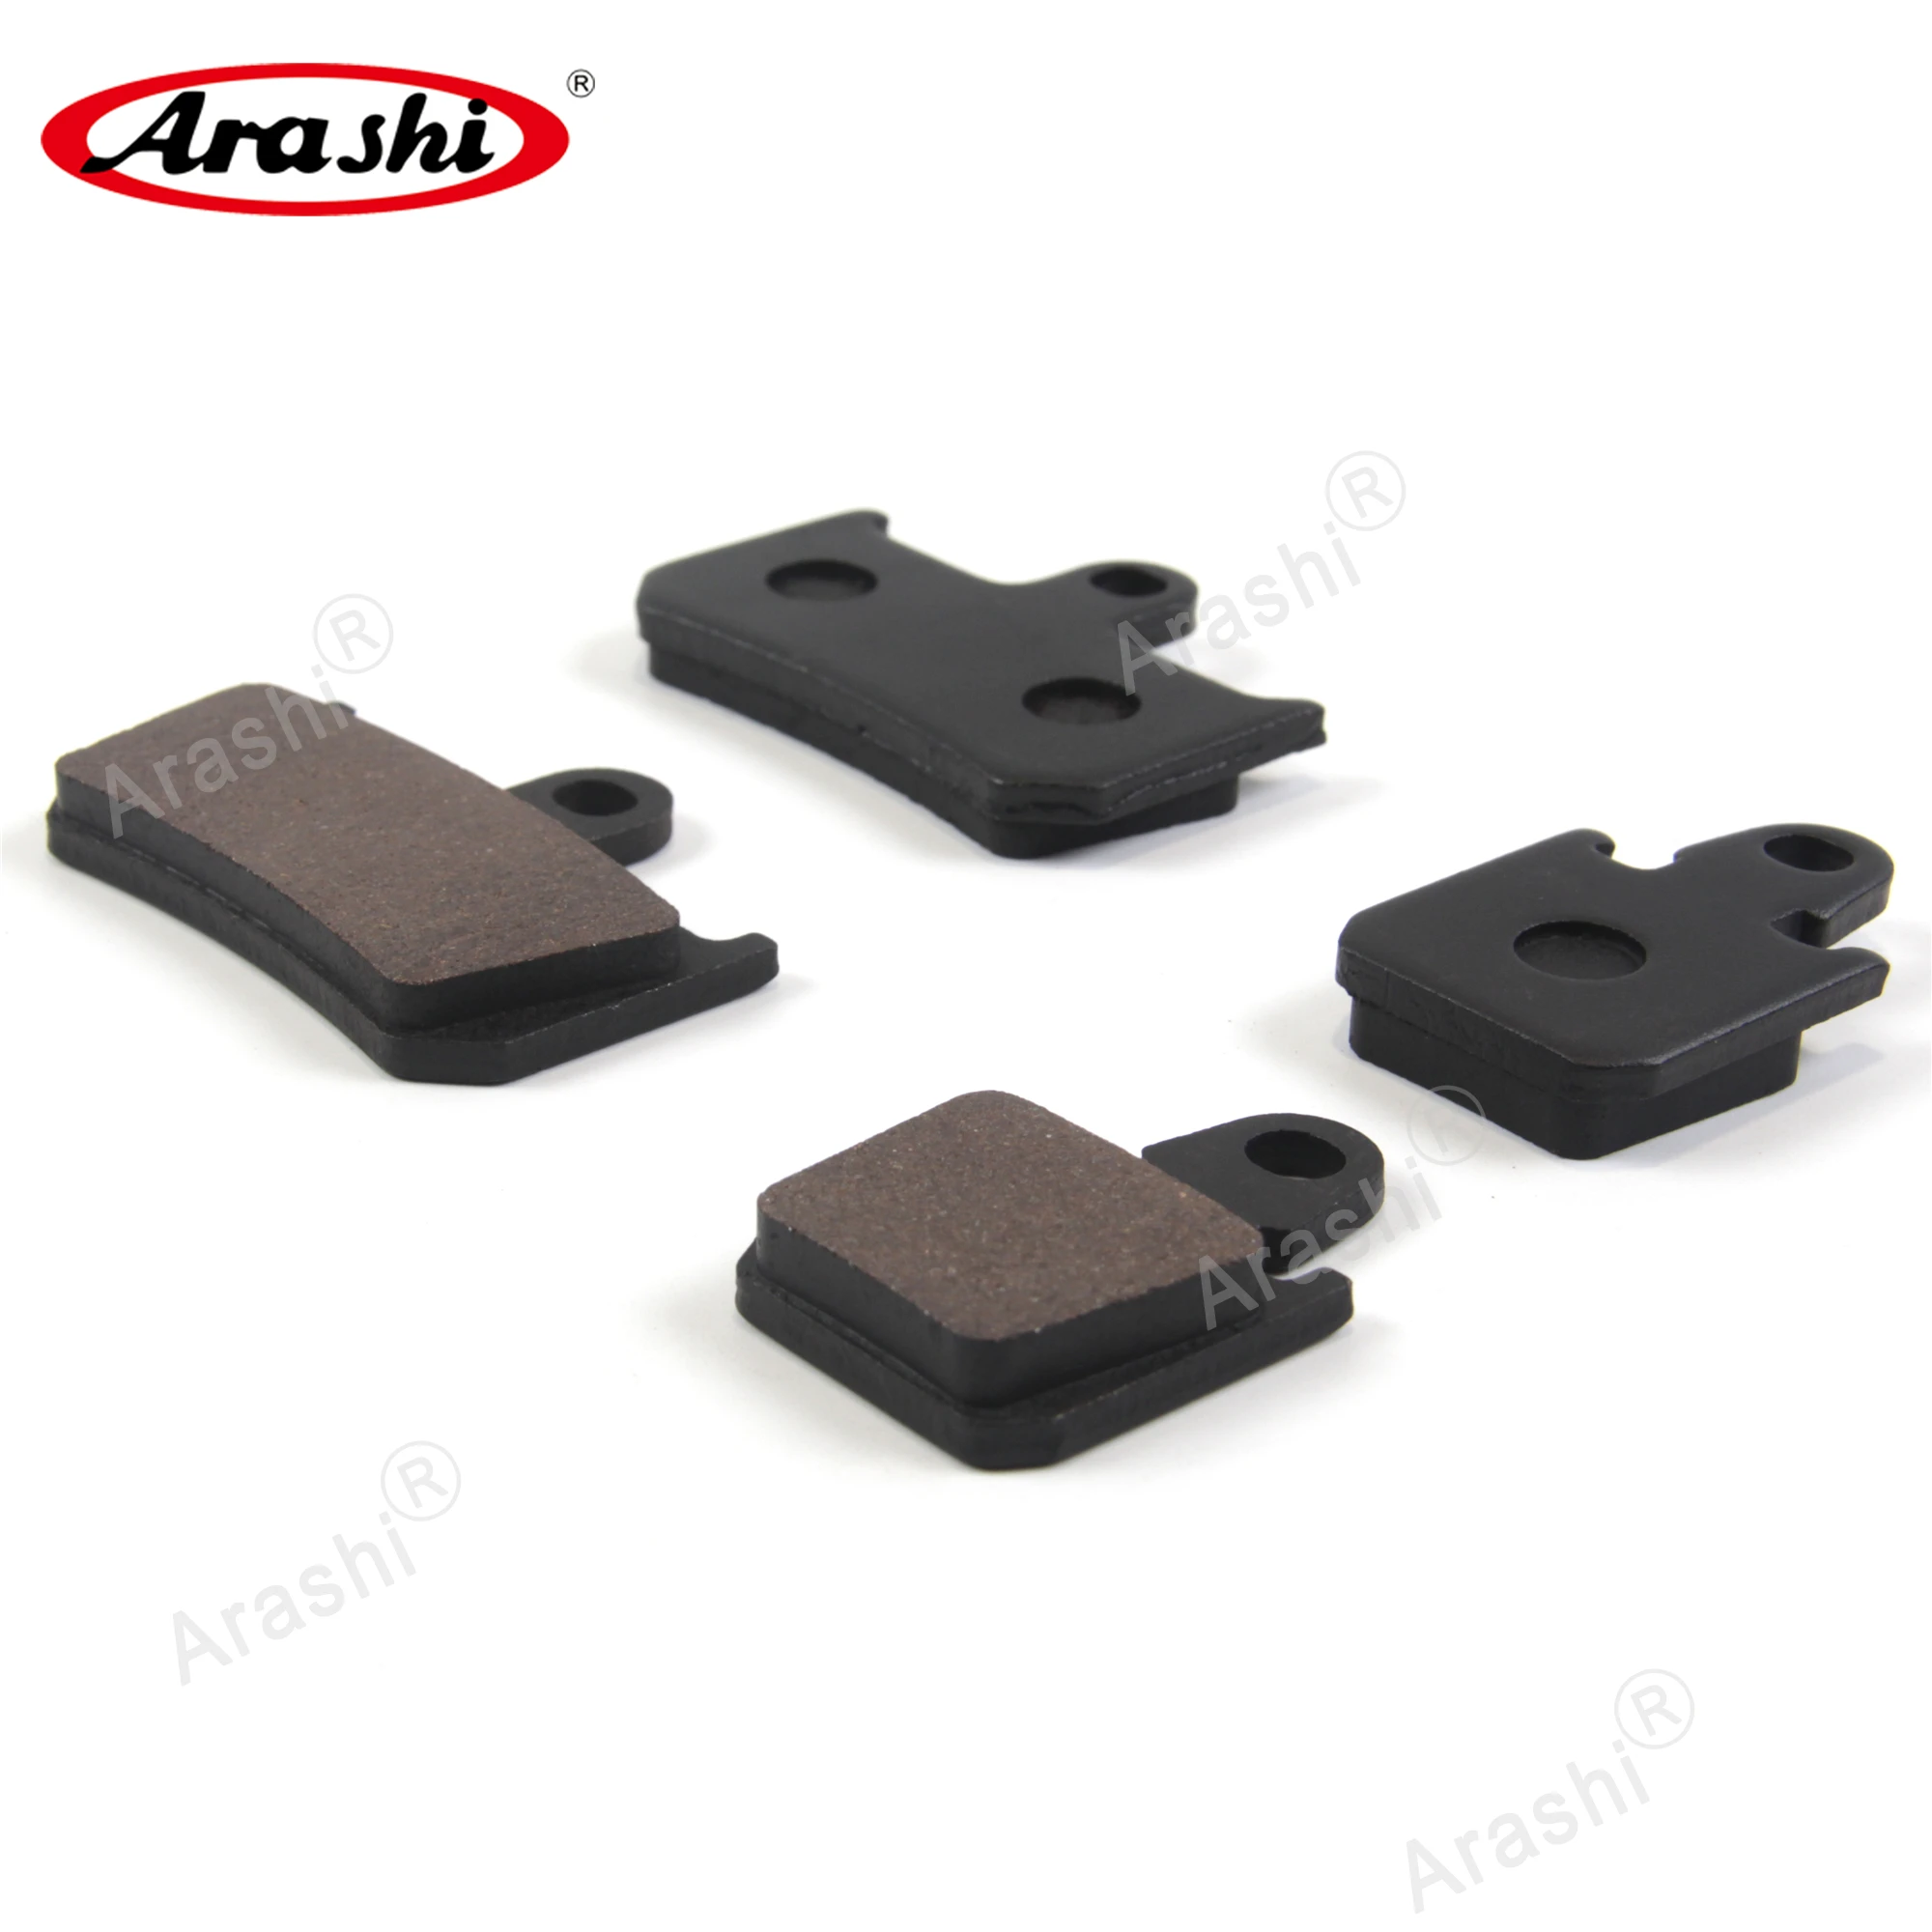 Arashi Front Brake Pads For YAMAHA YZF R1 2007 - 2014 Motorcycle Discs Rotors Pad Accessories YZF-R1 2008 2009 2010 2011 2012